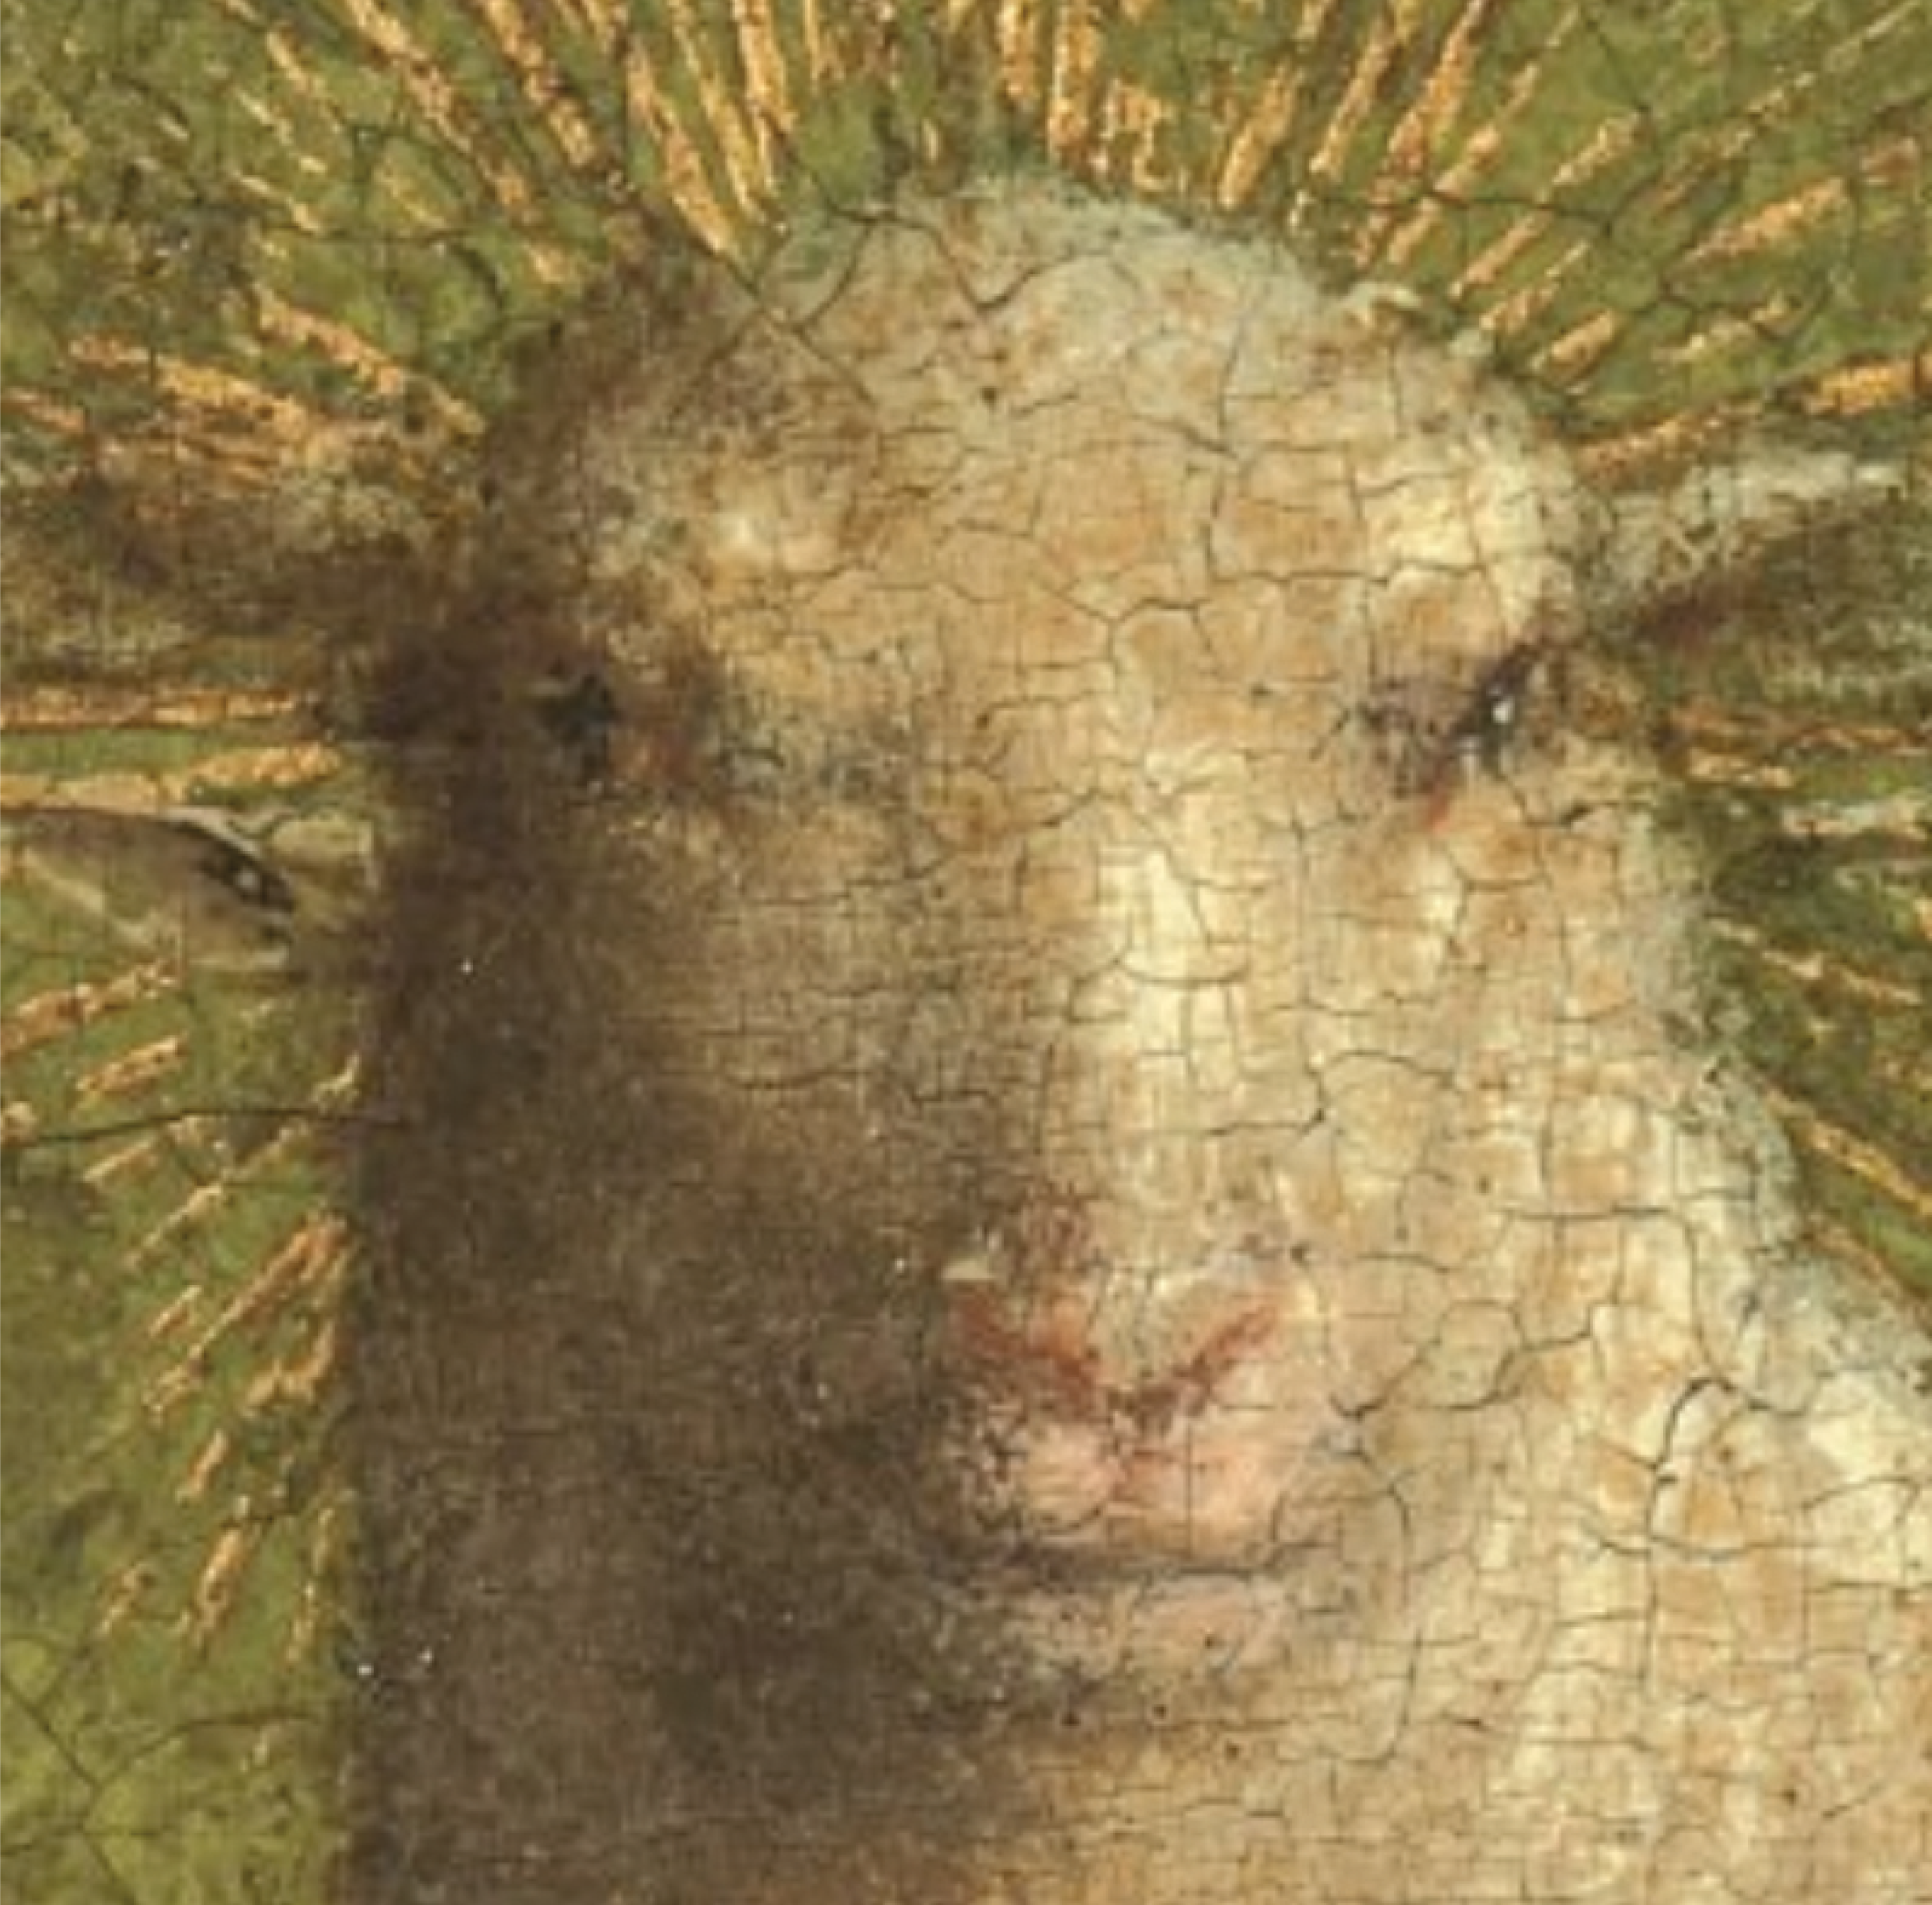 Image of the Month: Mutton Dressed as Lamb?